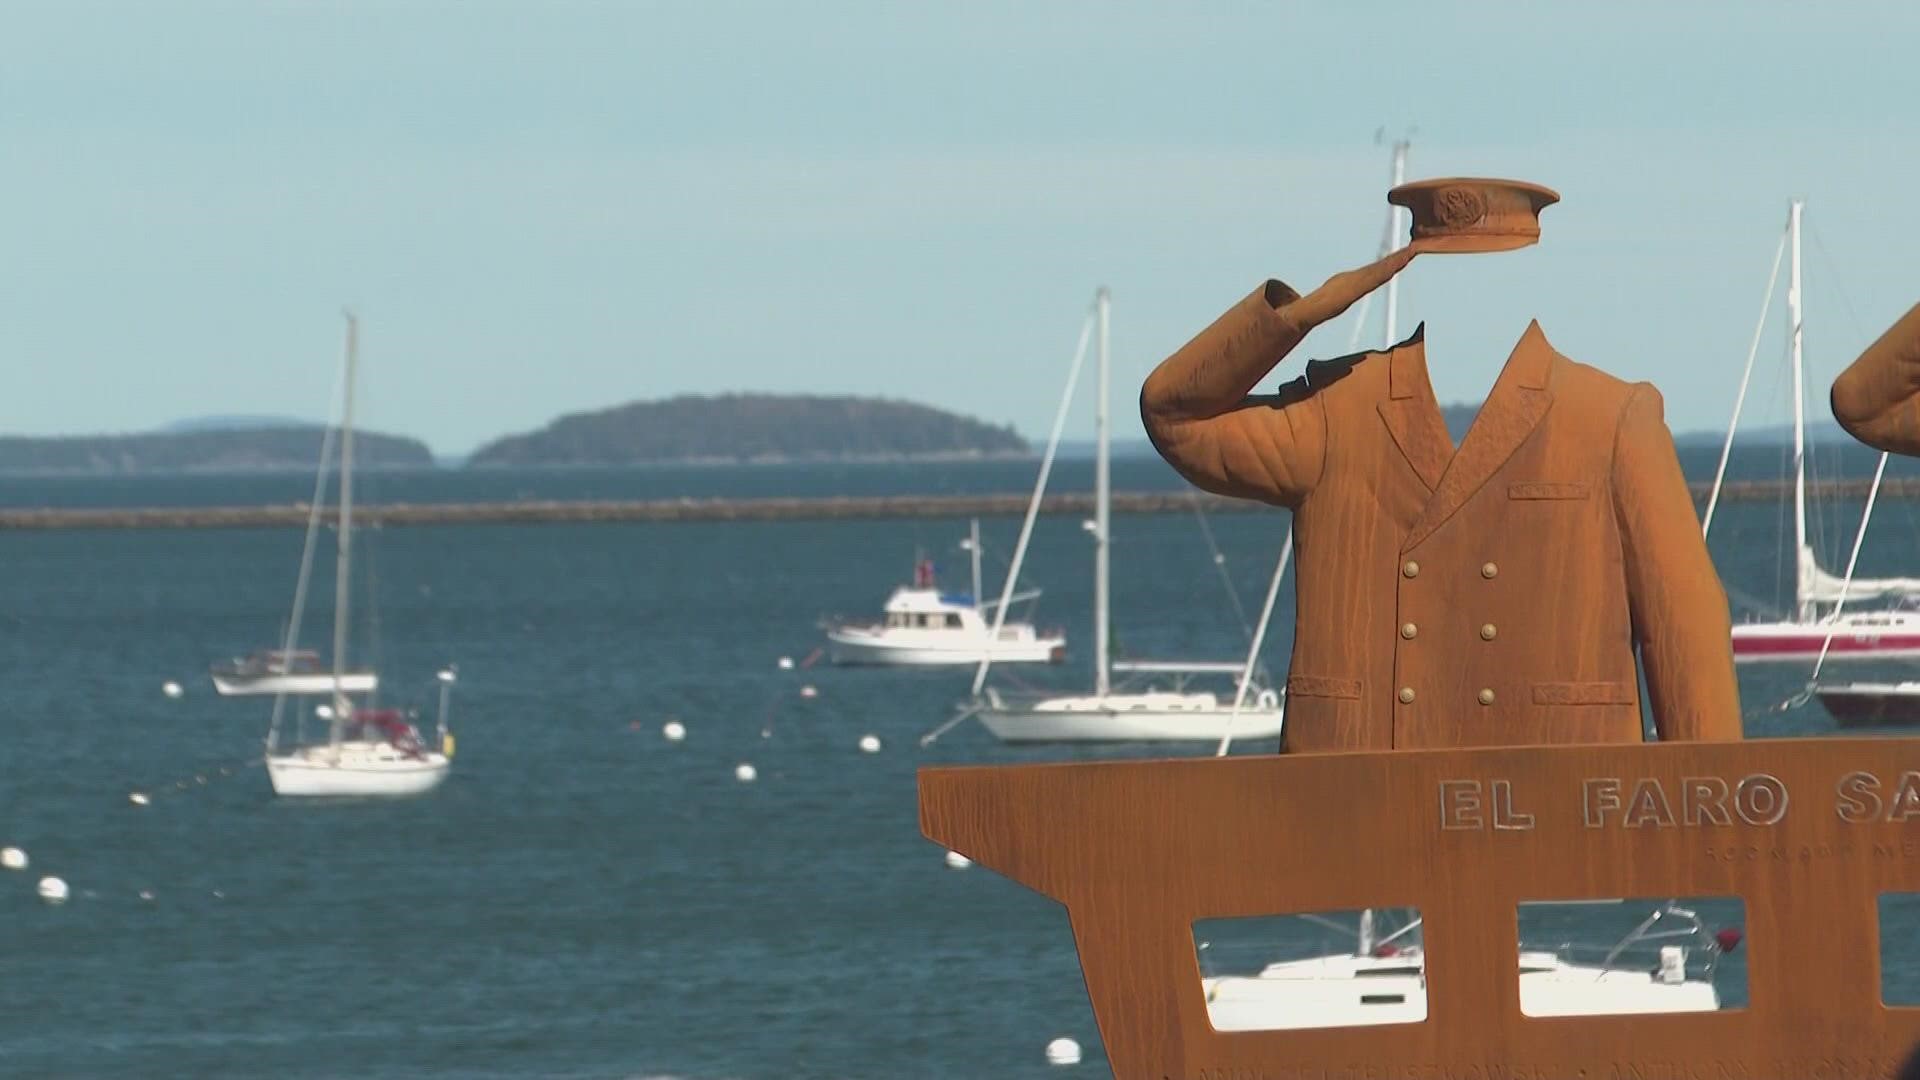 Four crewmembers who died on the El Faro were graduates of Maine Maritime Academy. A sculpture made by a fellow graduate is now a permanent fixture in Rockland.